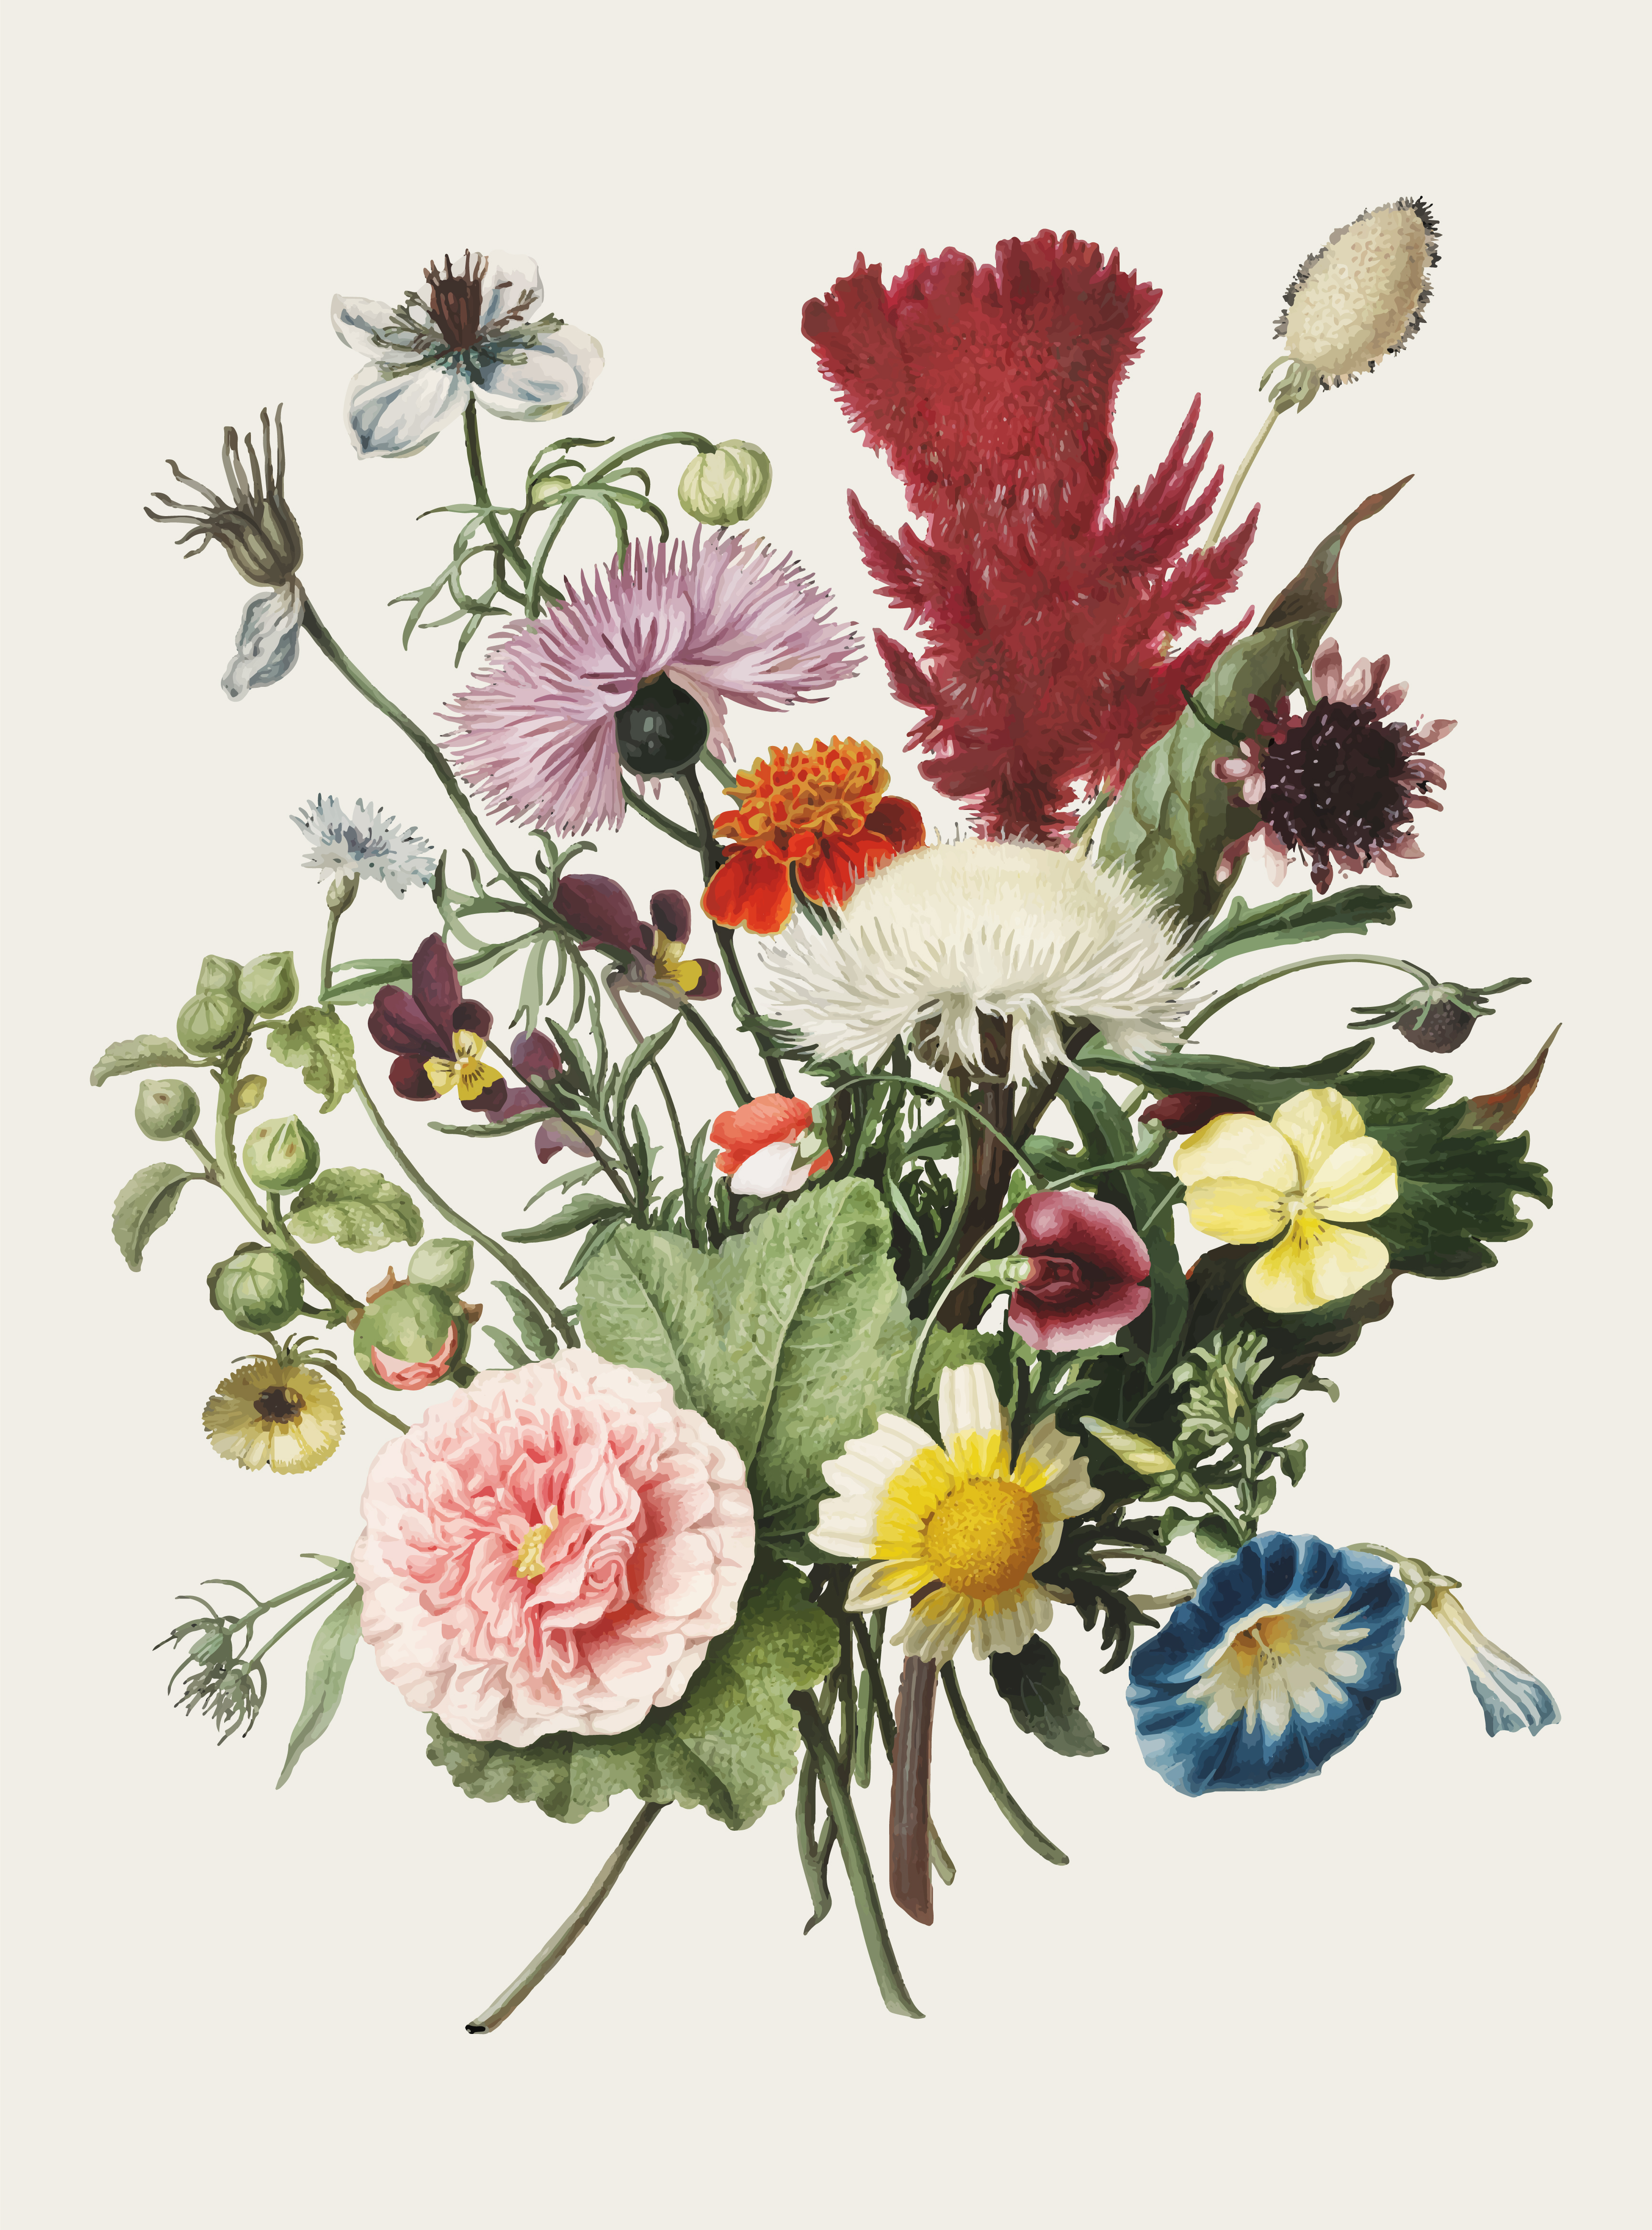 Vintage illustration of Bouquet of Flowers Download Free